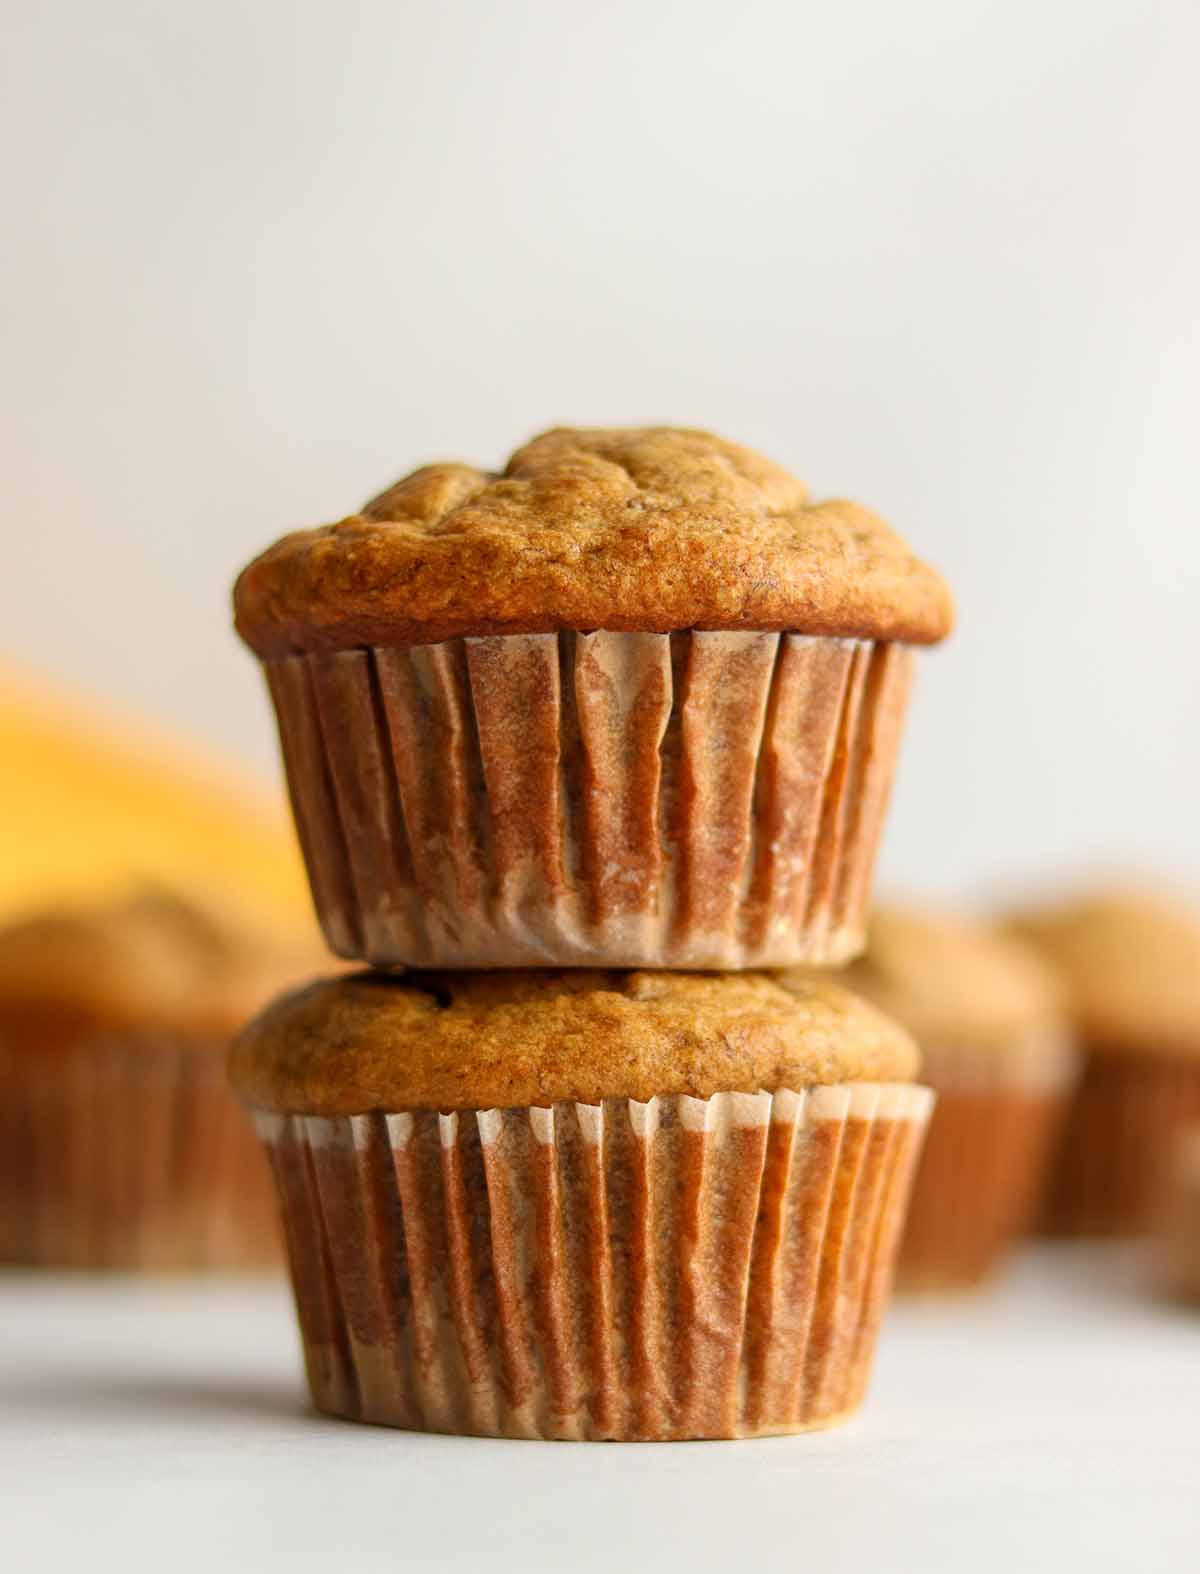 Oat flour muffins stacked on top of each other